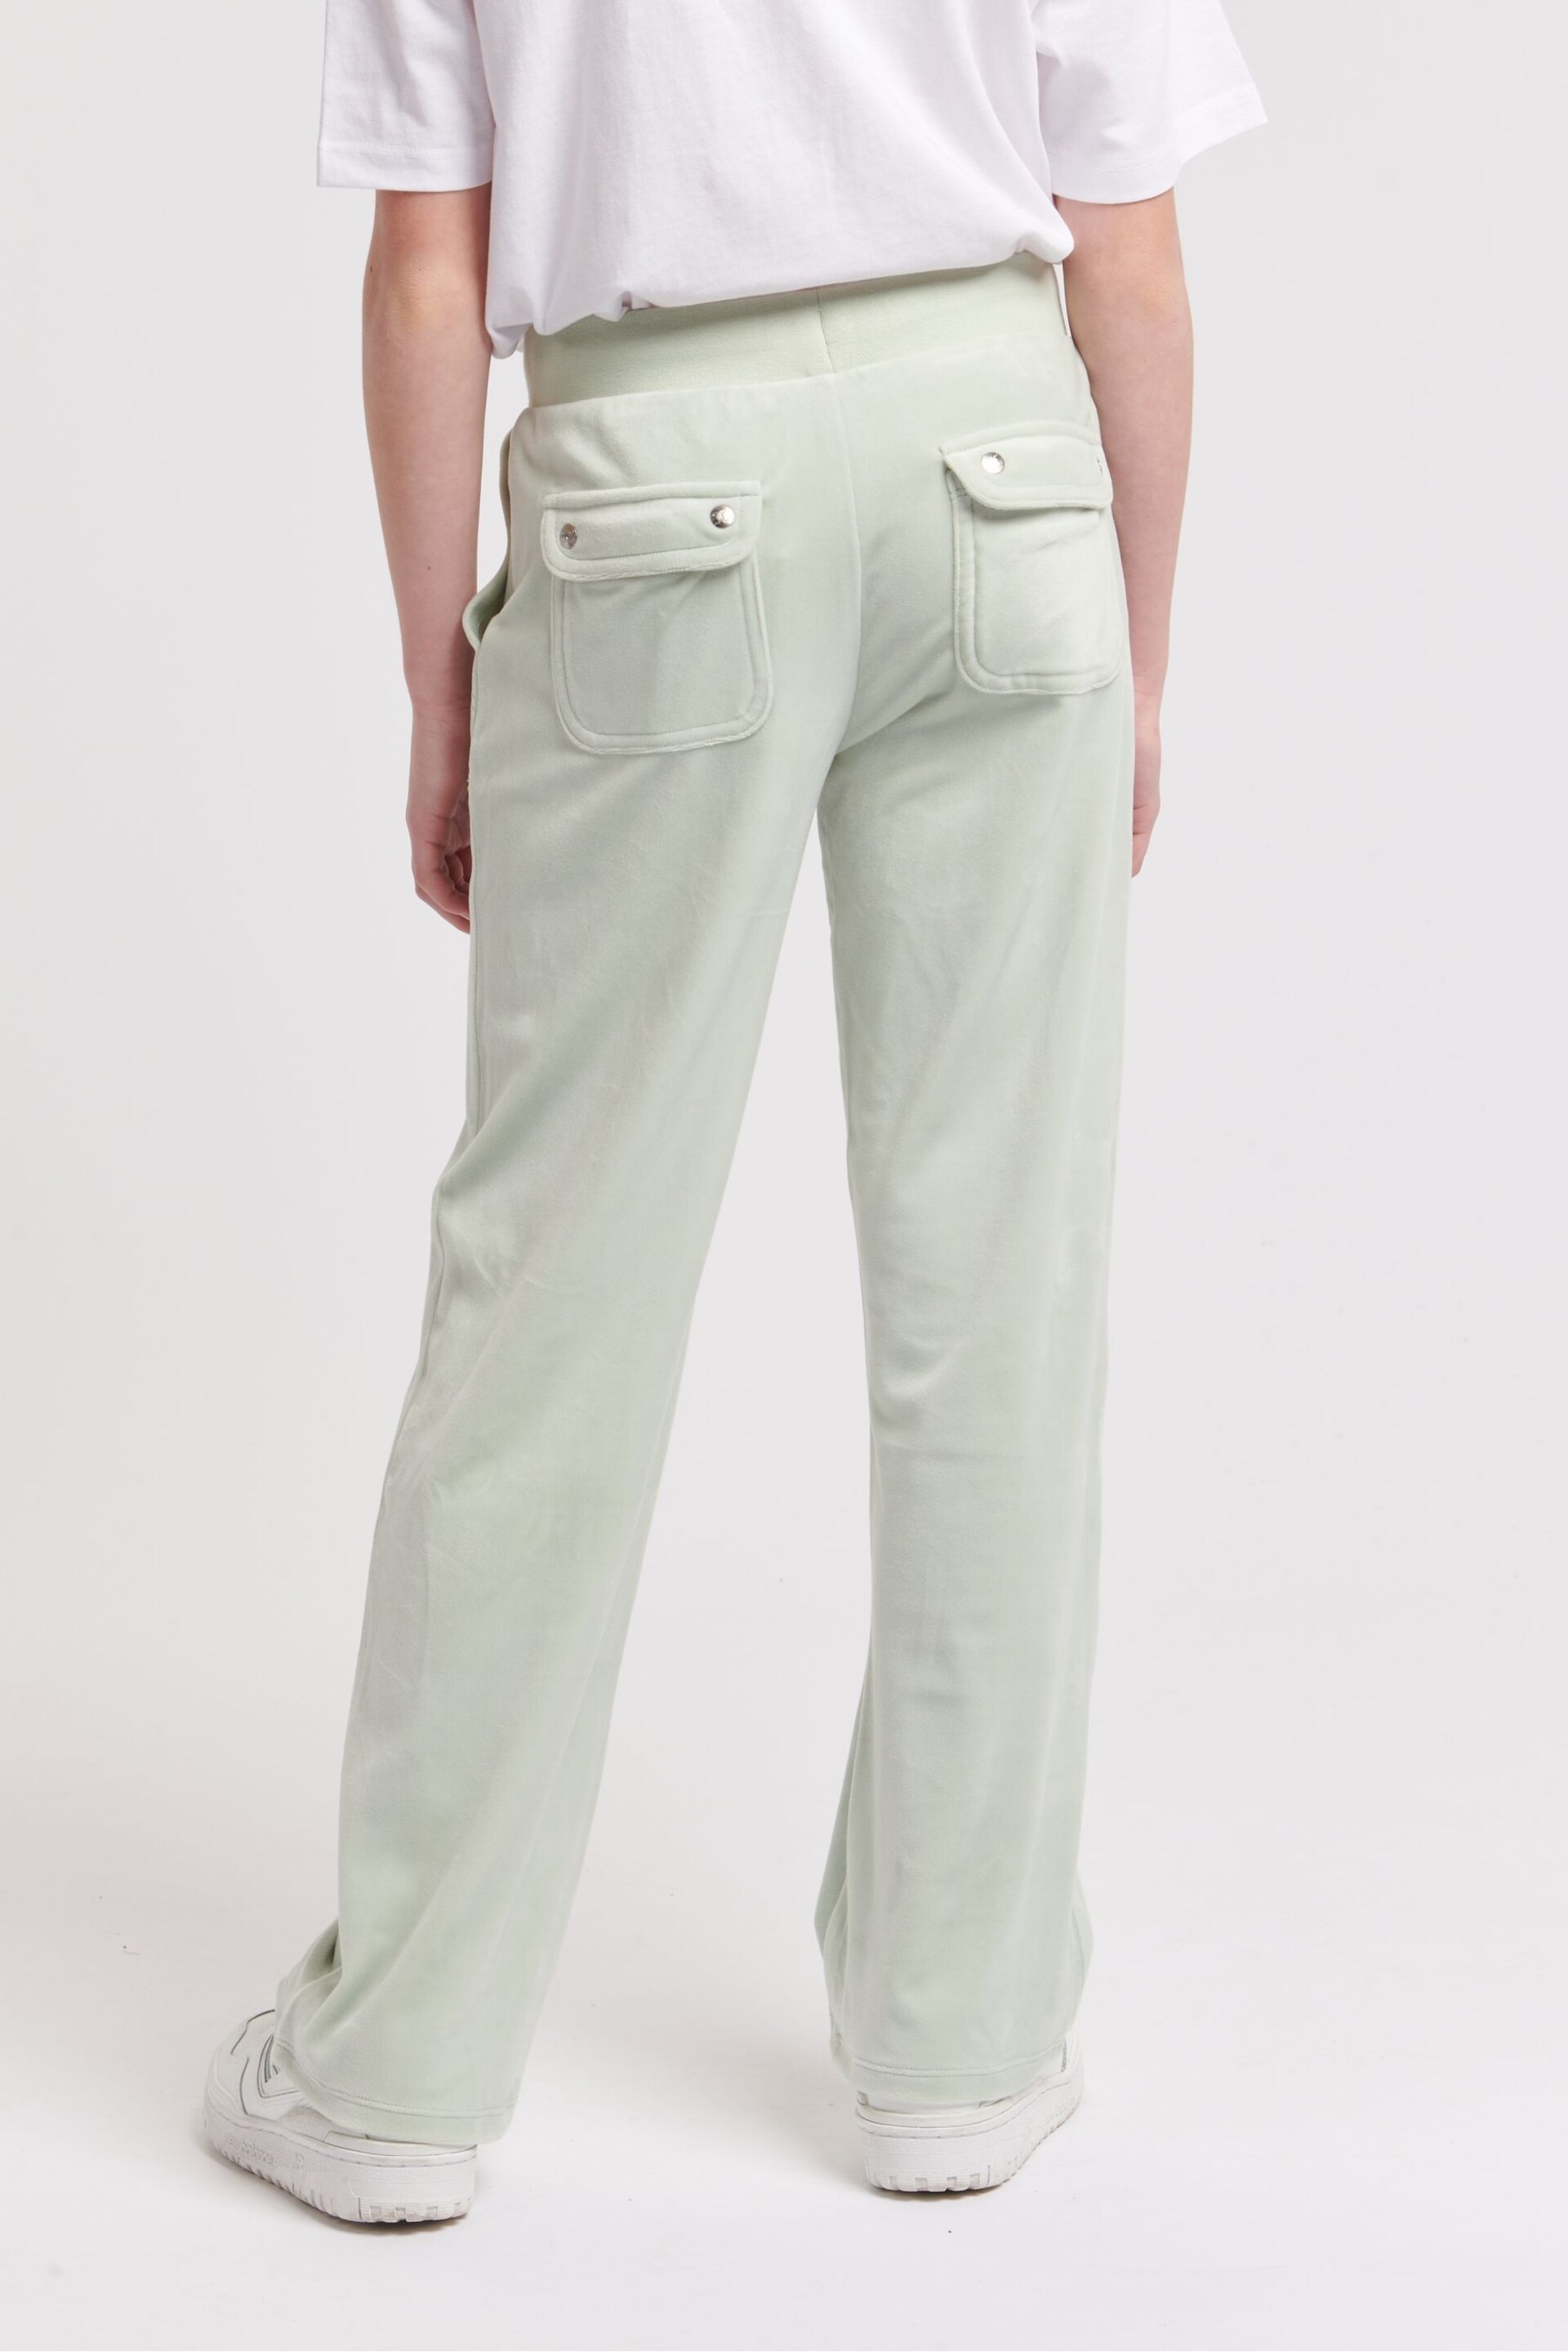 Juicy Couture Tonal Wide Leg Joggers - Image 4 of 7